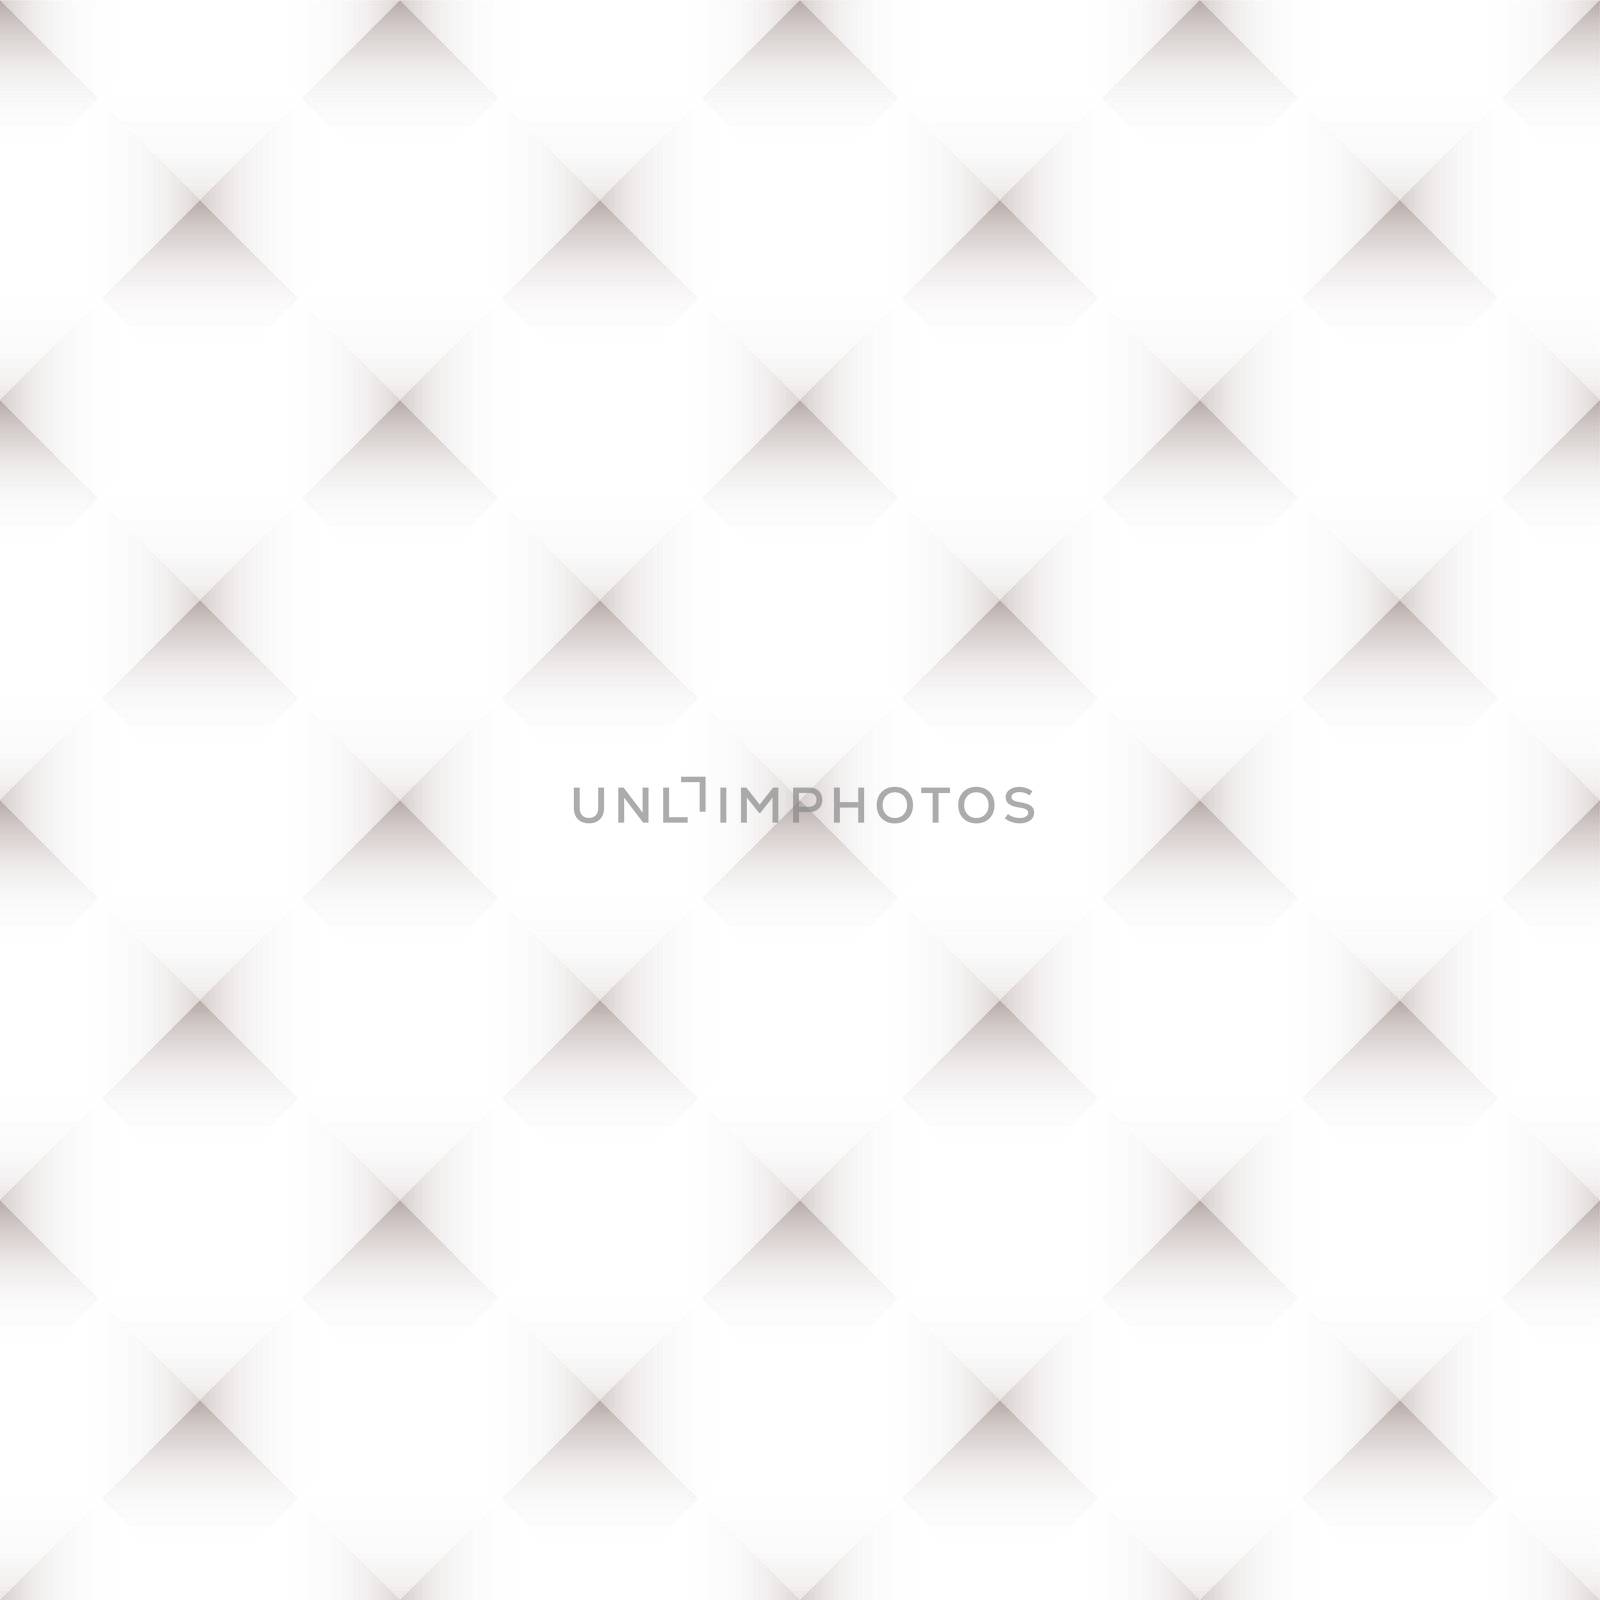 Clean white background with white Pyramids